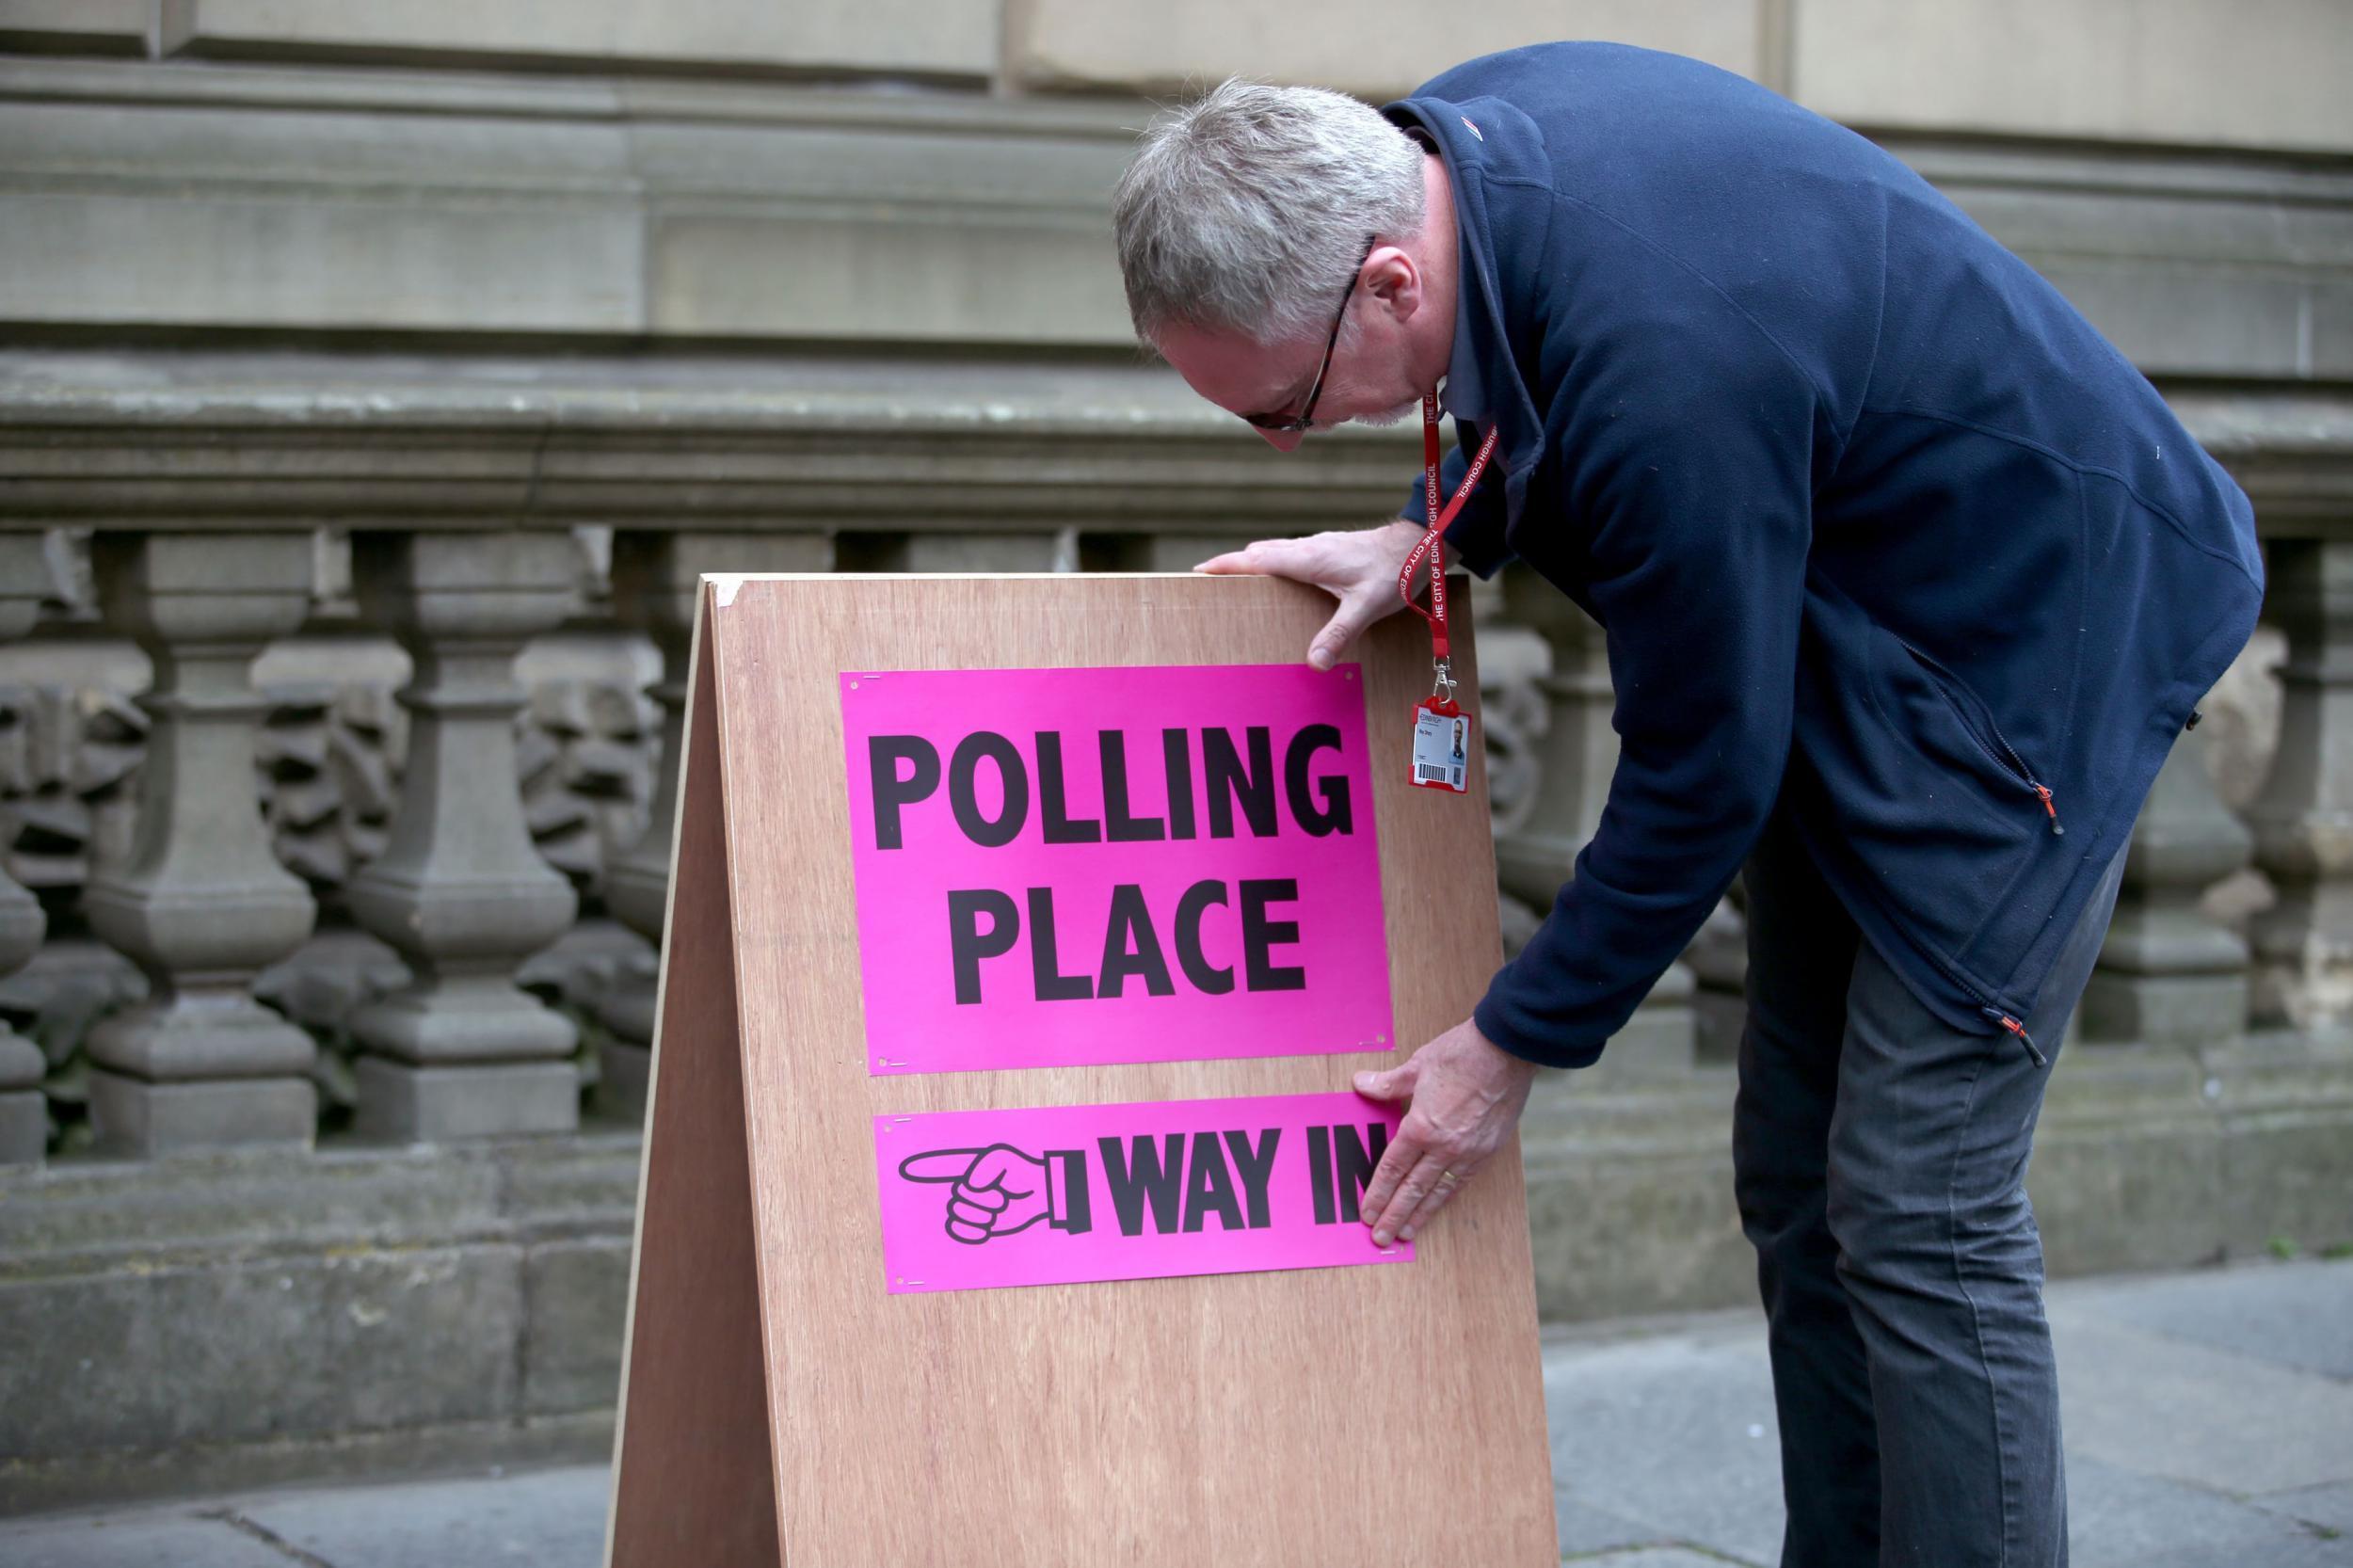 Councils are preparing for local elections taking place in England, Scotland and Wales on 4 May